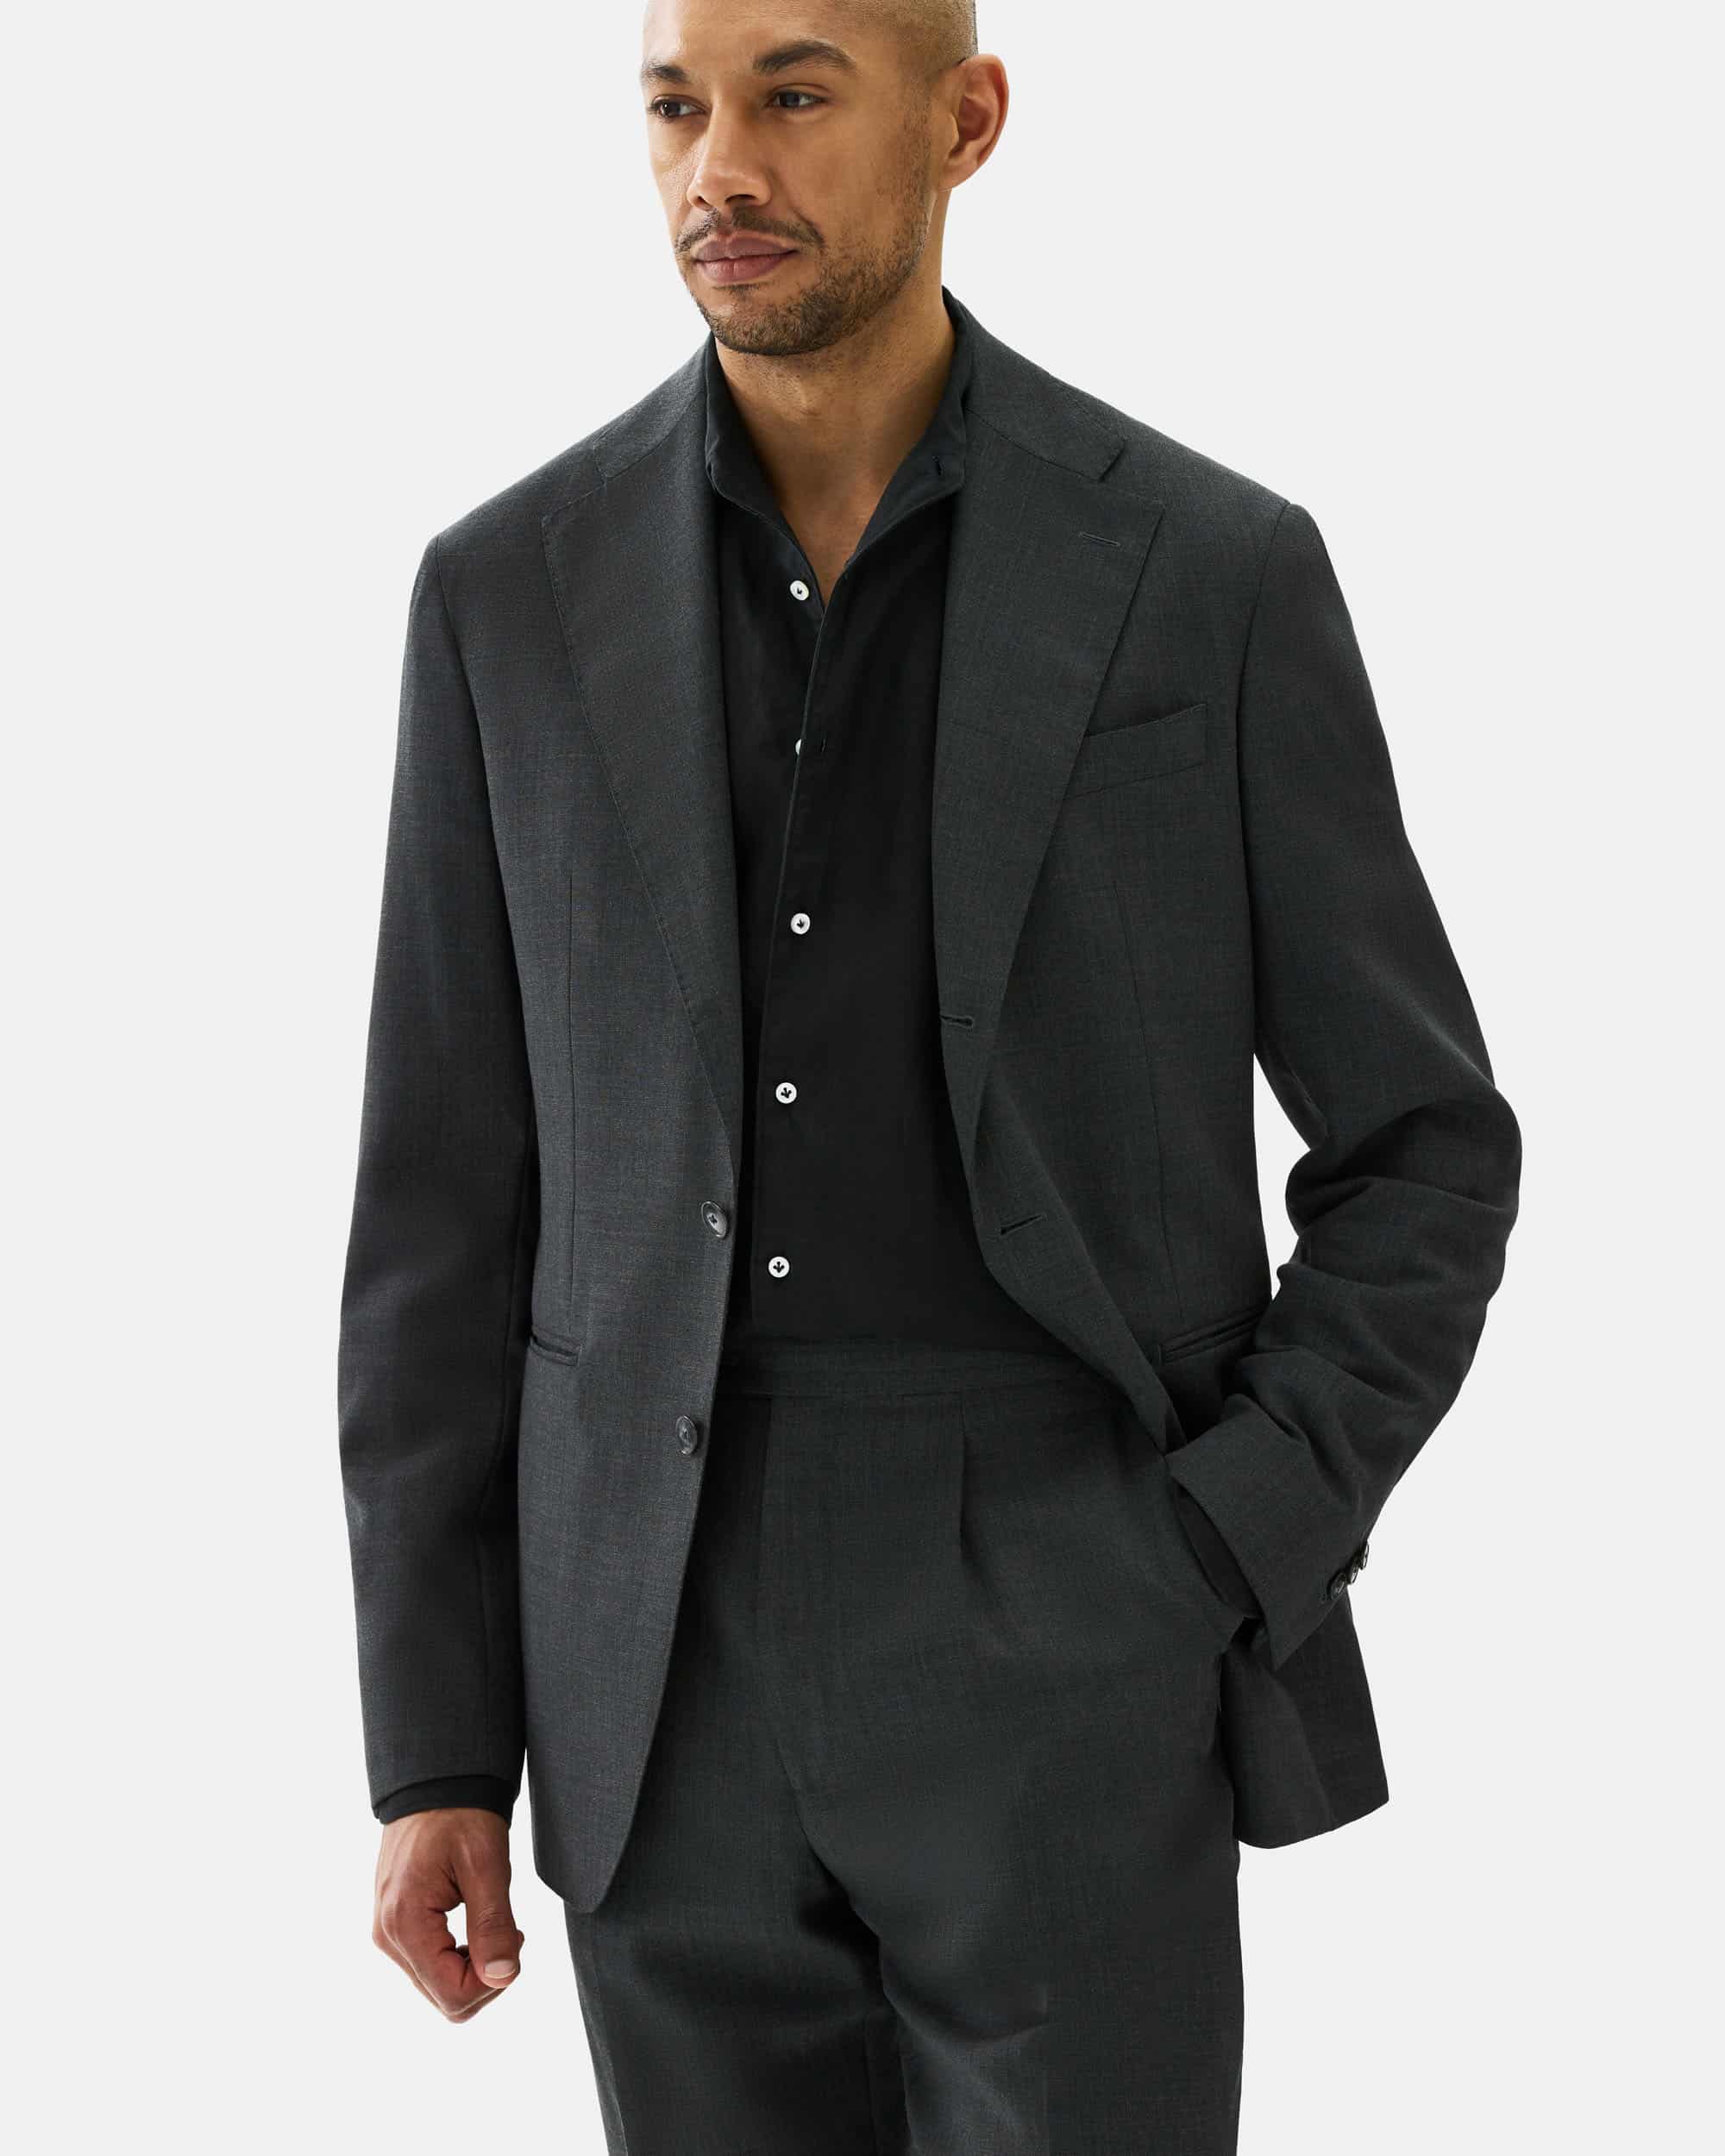 Suit traveller antracite grey image 2